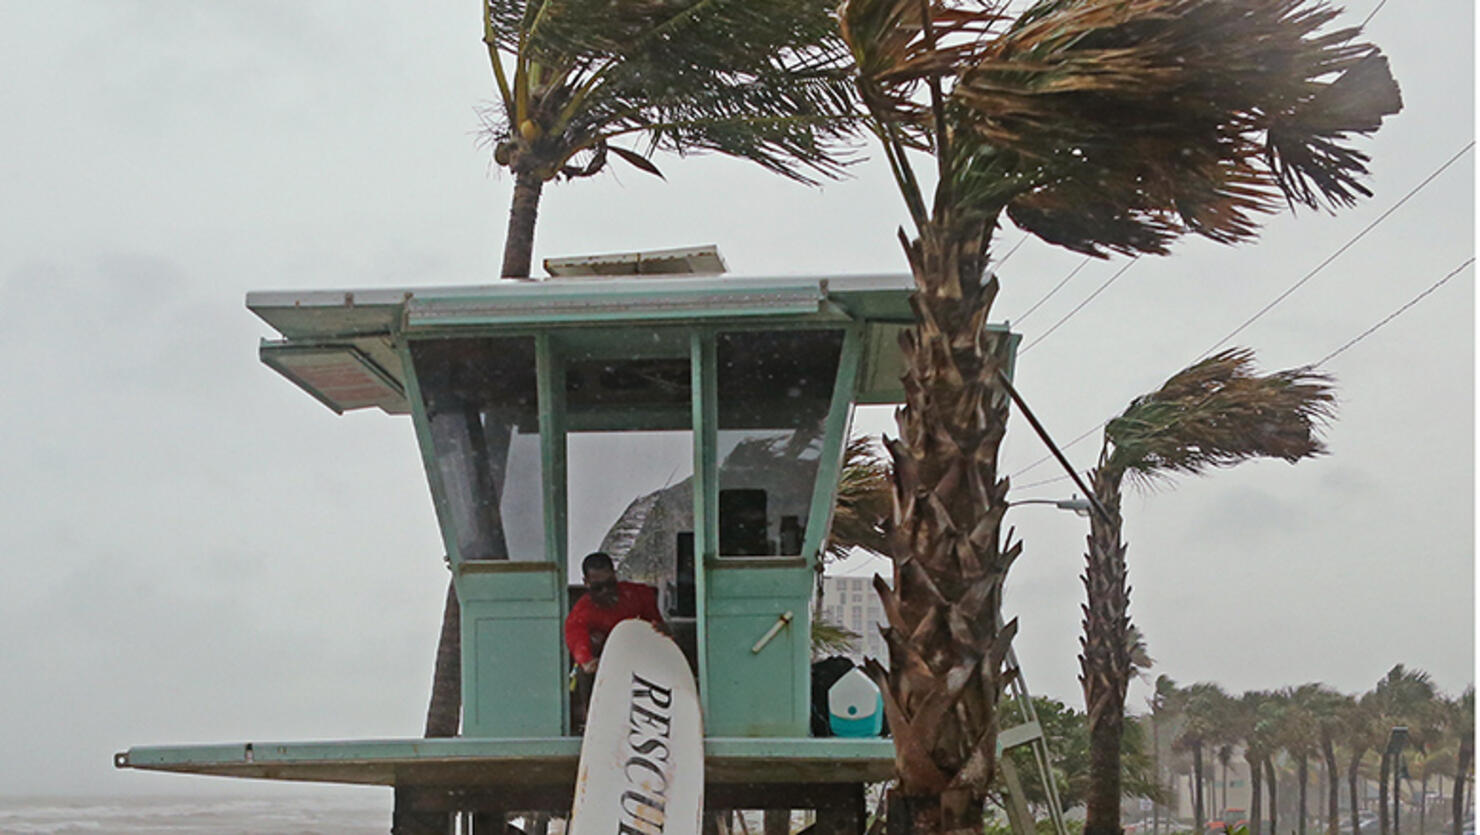 Dania Beach Ocean Rescue Alice Henley and Dillon Wise secure their surfboard as Tropical Storm Gordon passes by South Florida with wind gusts and heavy rainfall